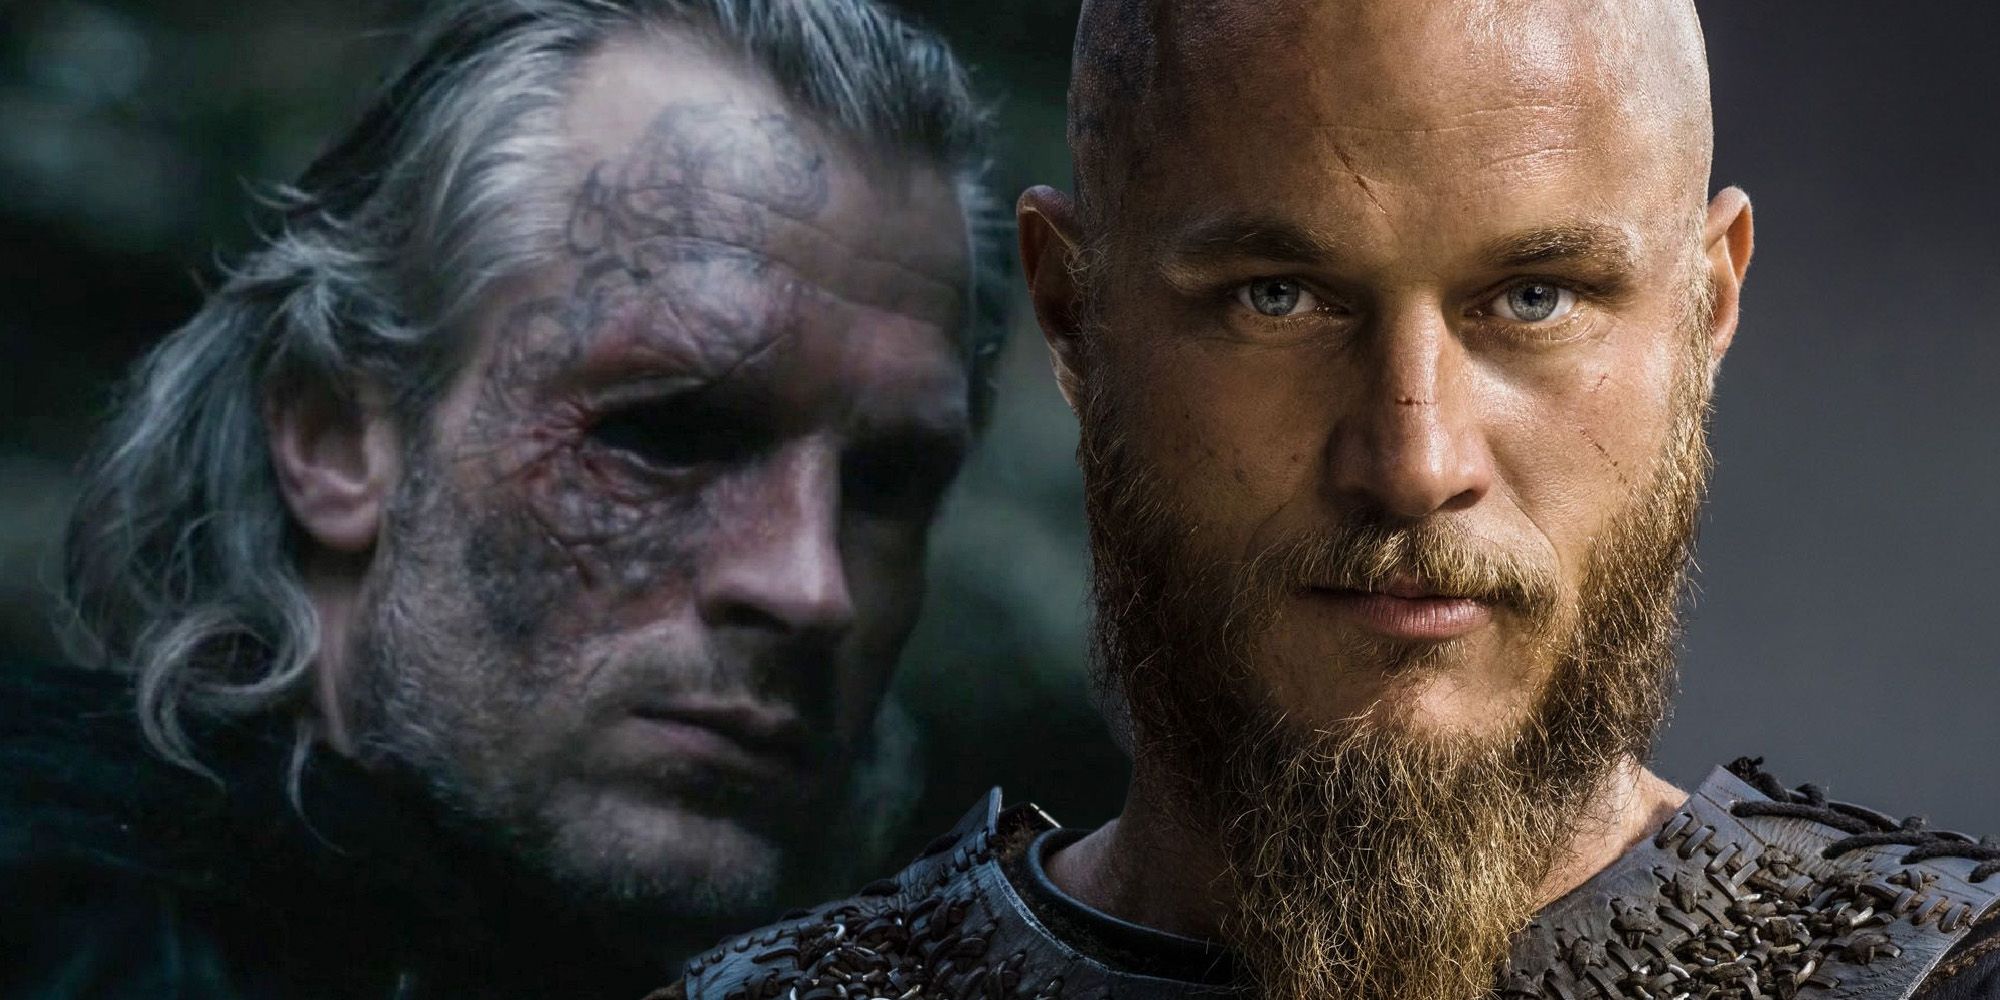 Who is the 1 eyed man in Vikings?